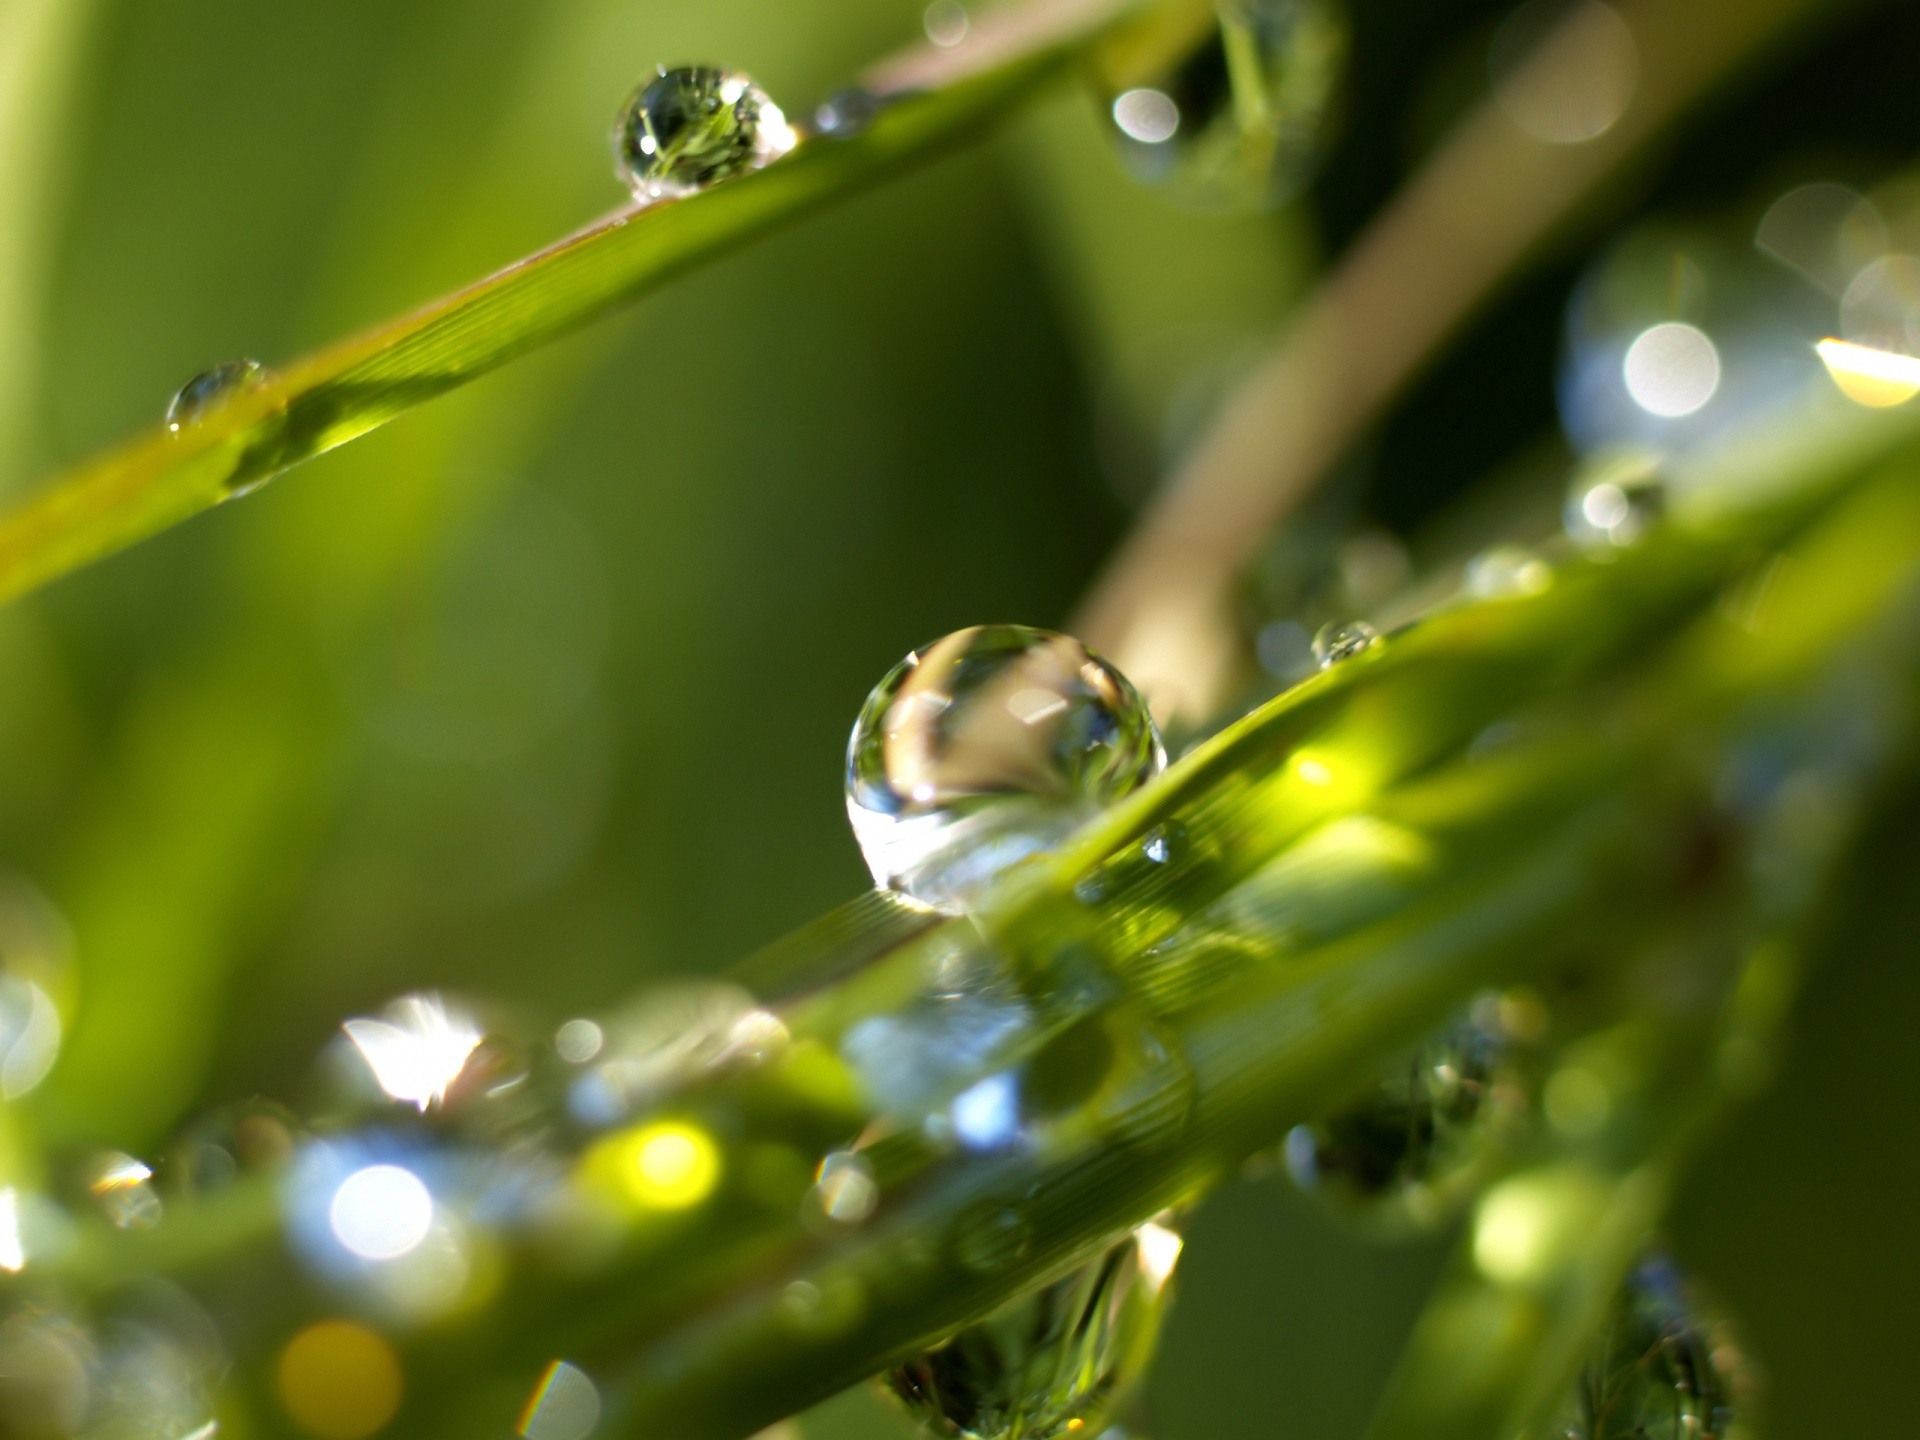 11440 download wallpaper plants, water, drops, green screensavers and pictures for free